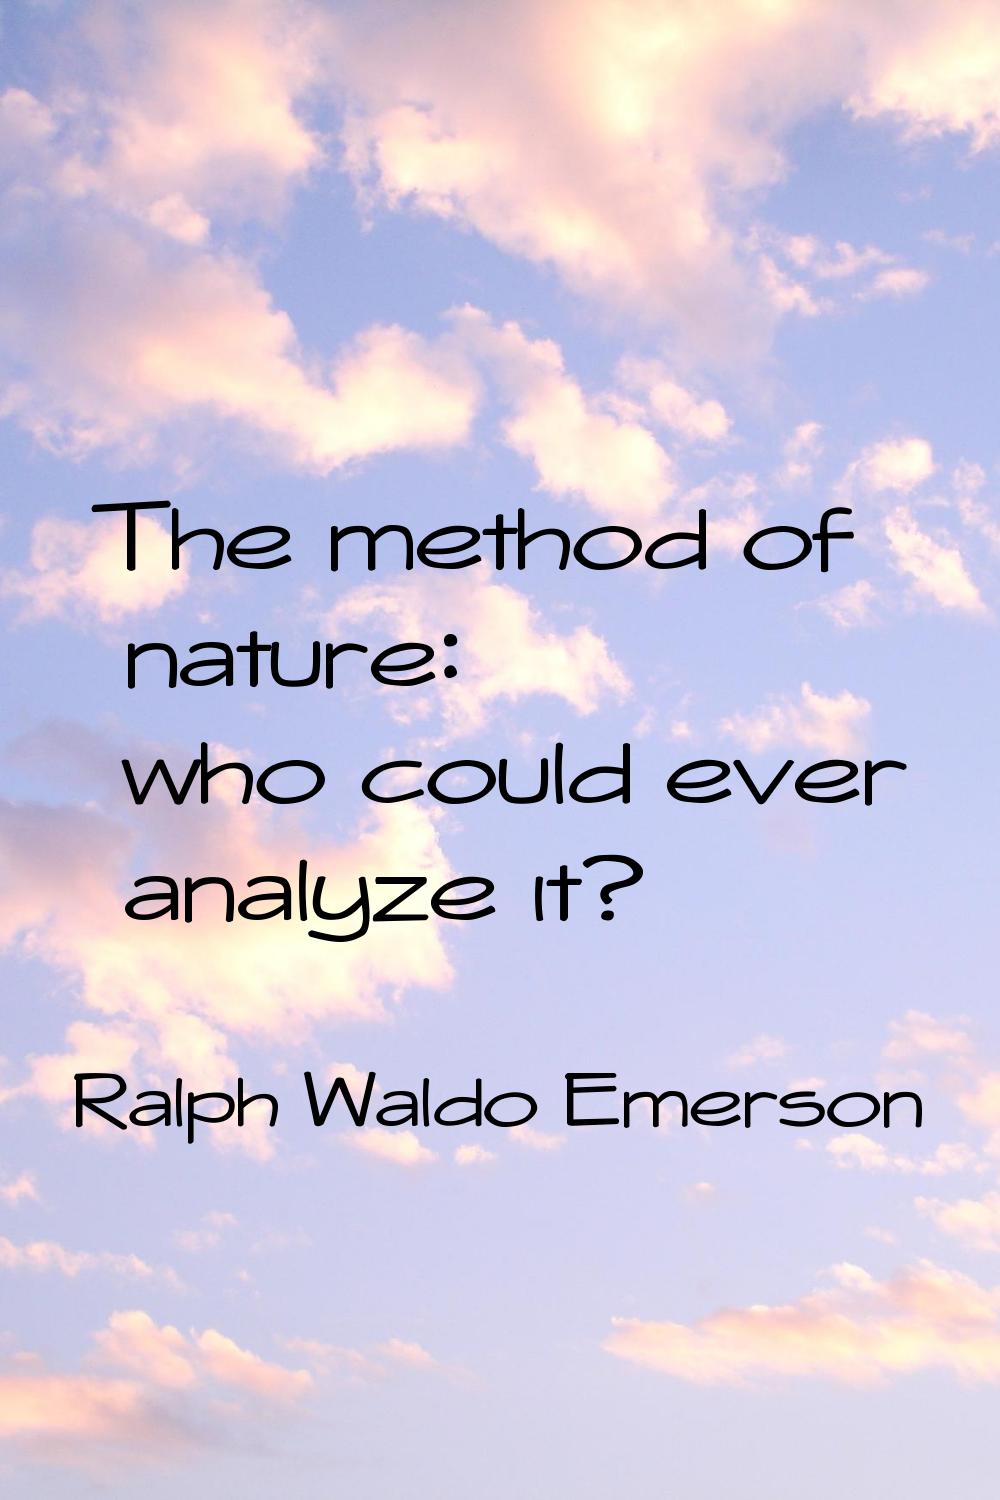 The method of nature: who could ever analyze it?